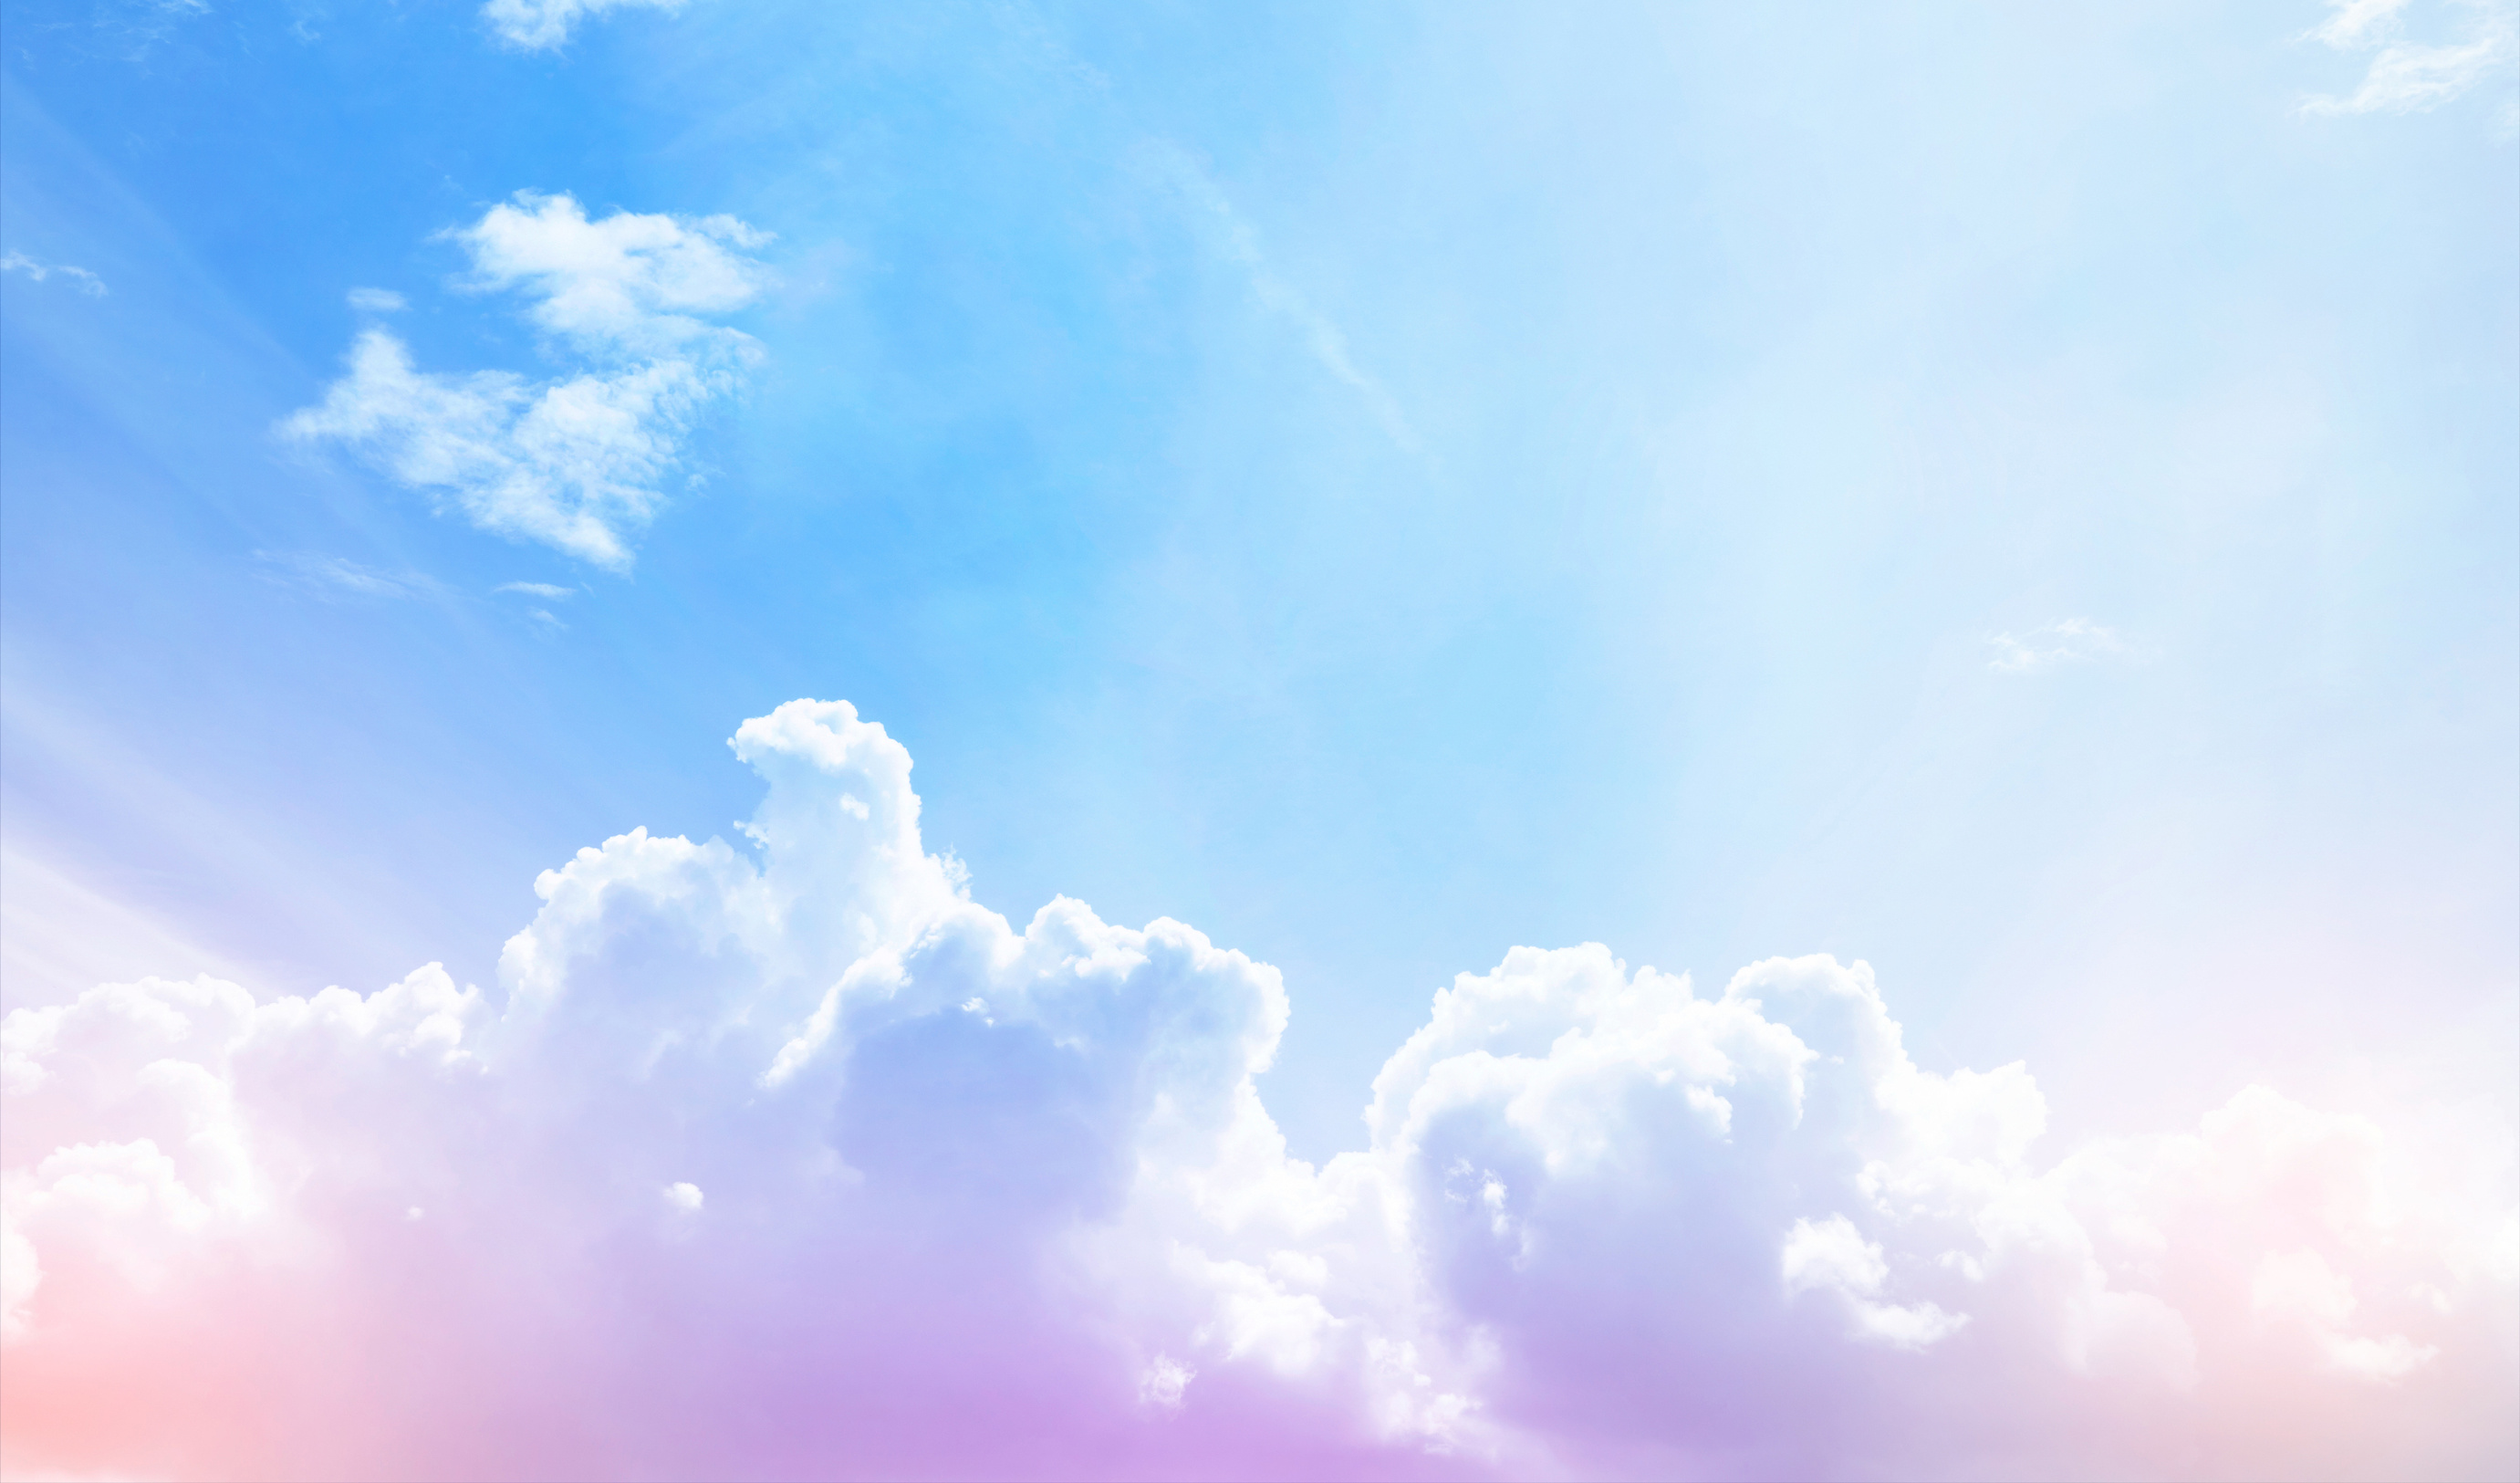 Colourful Sky with Soft Clouds with Pastel Colour in Blue, Puple